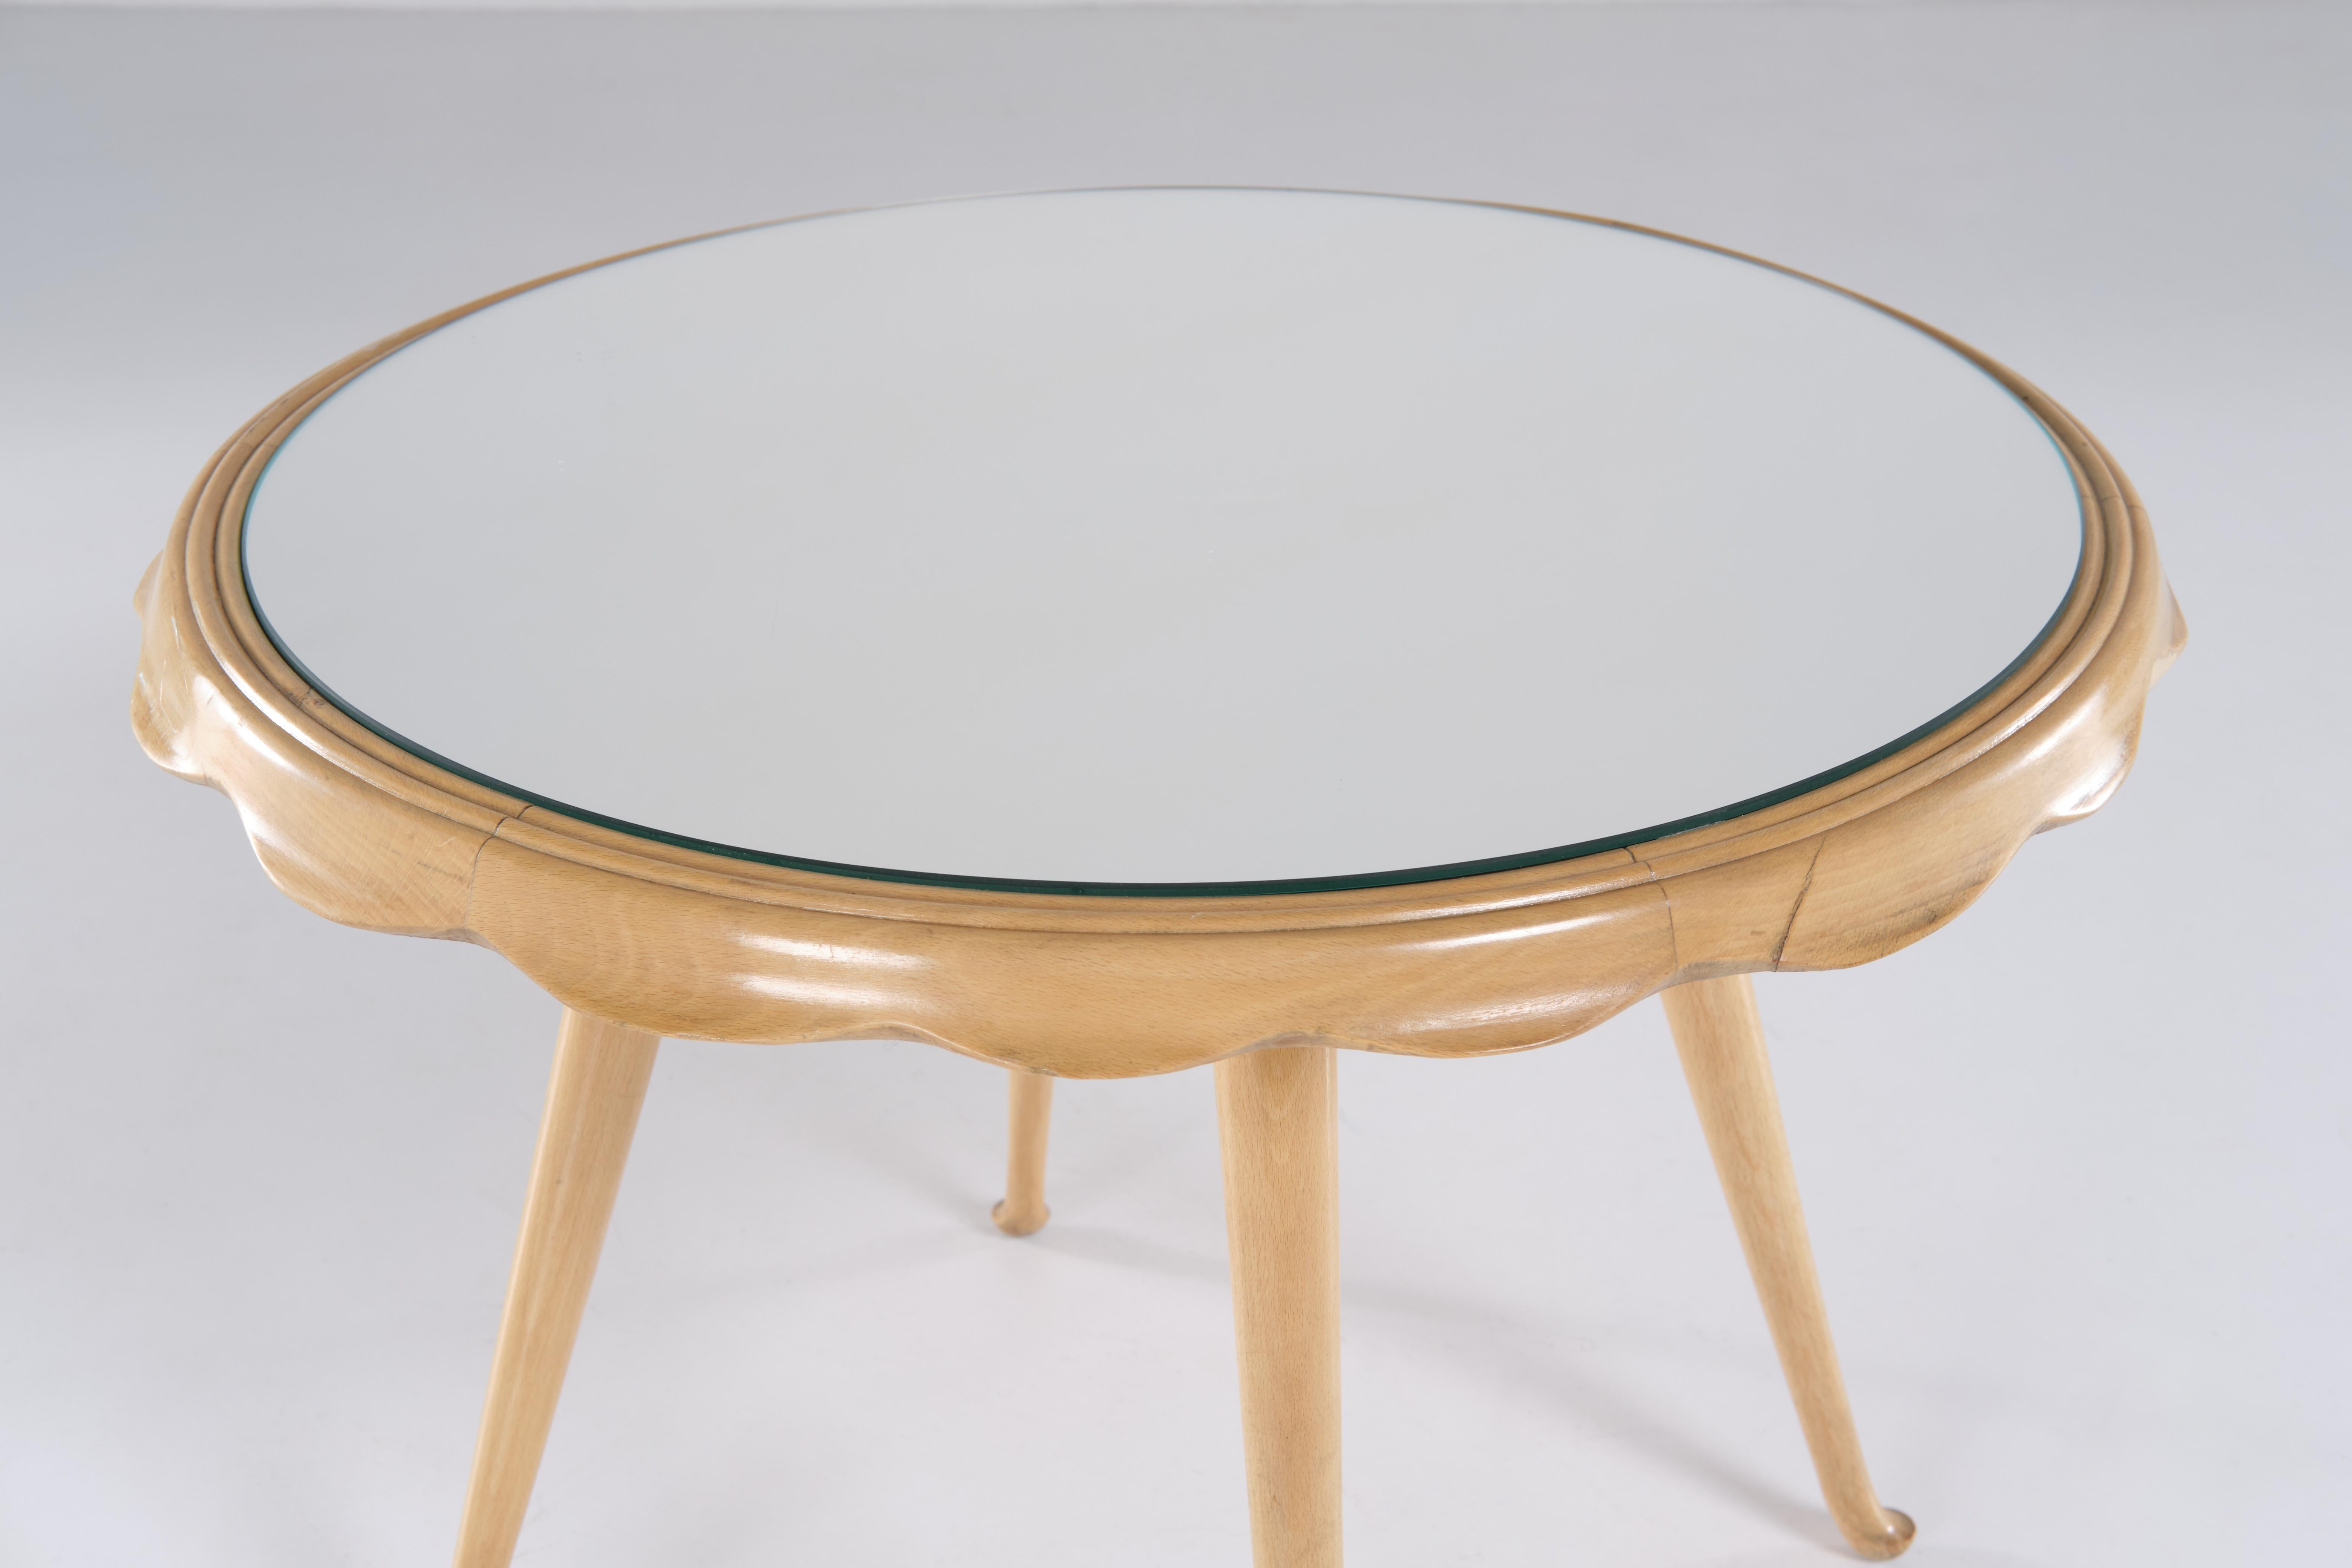 Mid-20th Century One Wood and Mirrored Glass Low Table, Italian Design, 1950 circa For Sale